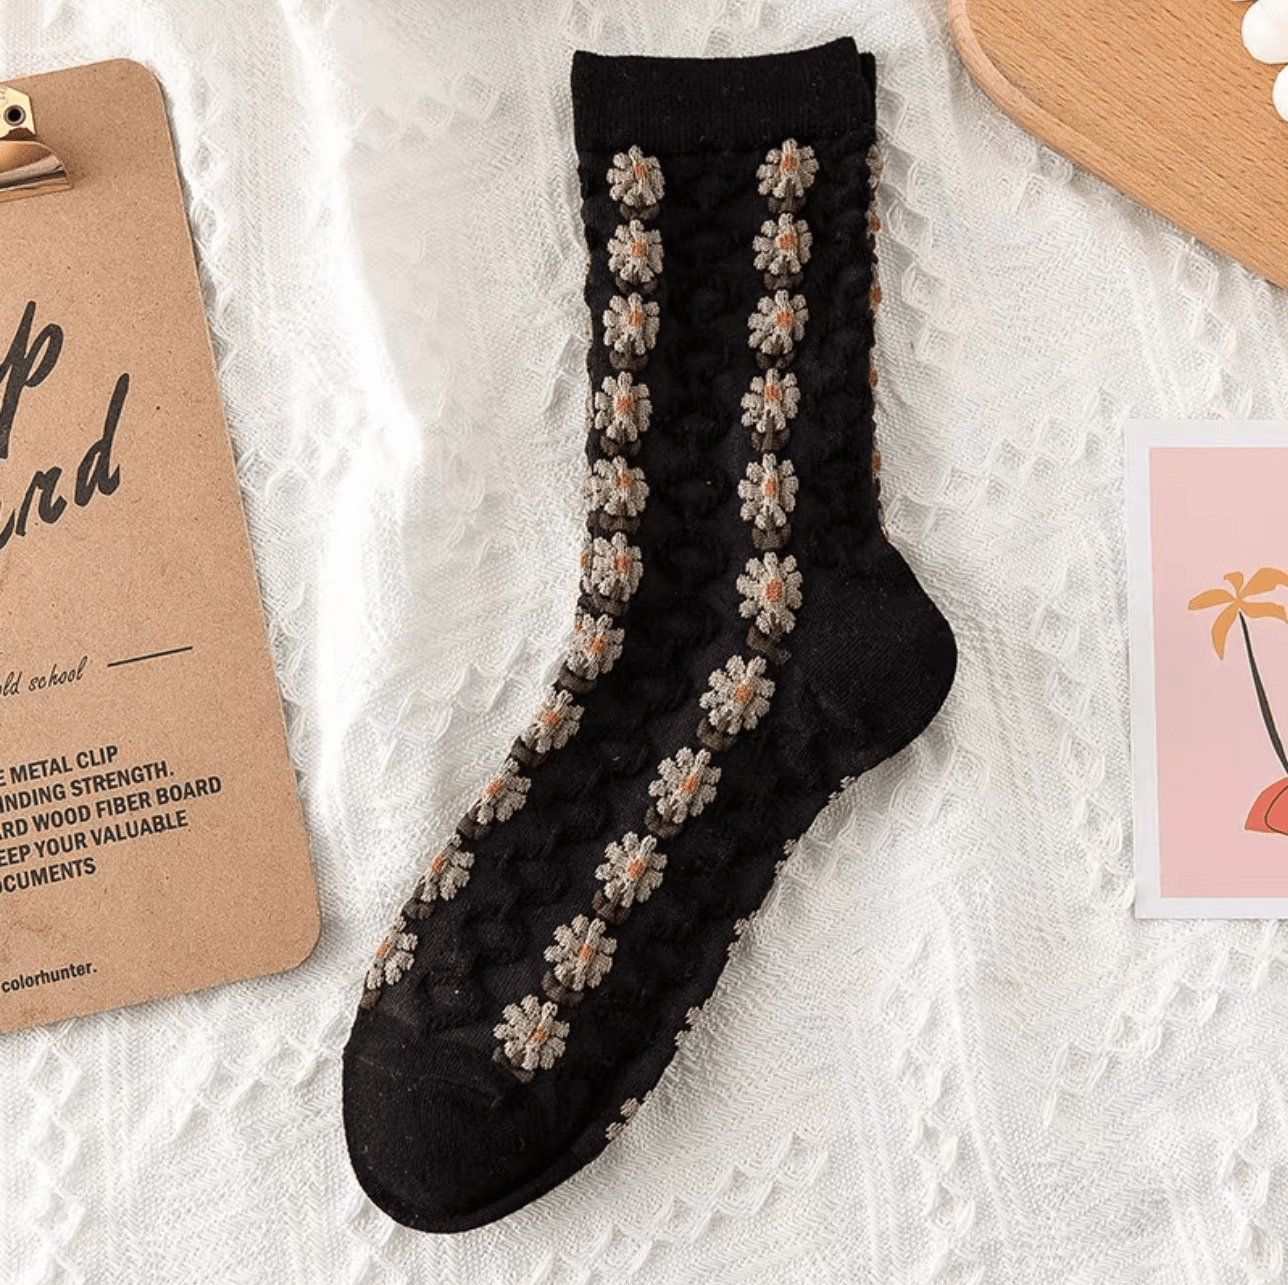 Witty Socks Socks Black / 1 Pair Witty Socks Wildflower Whispers Collection